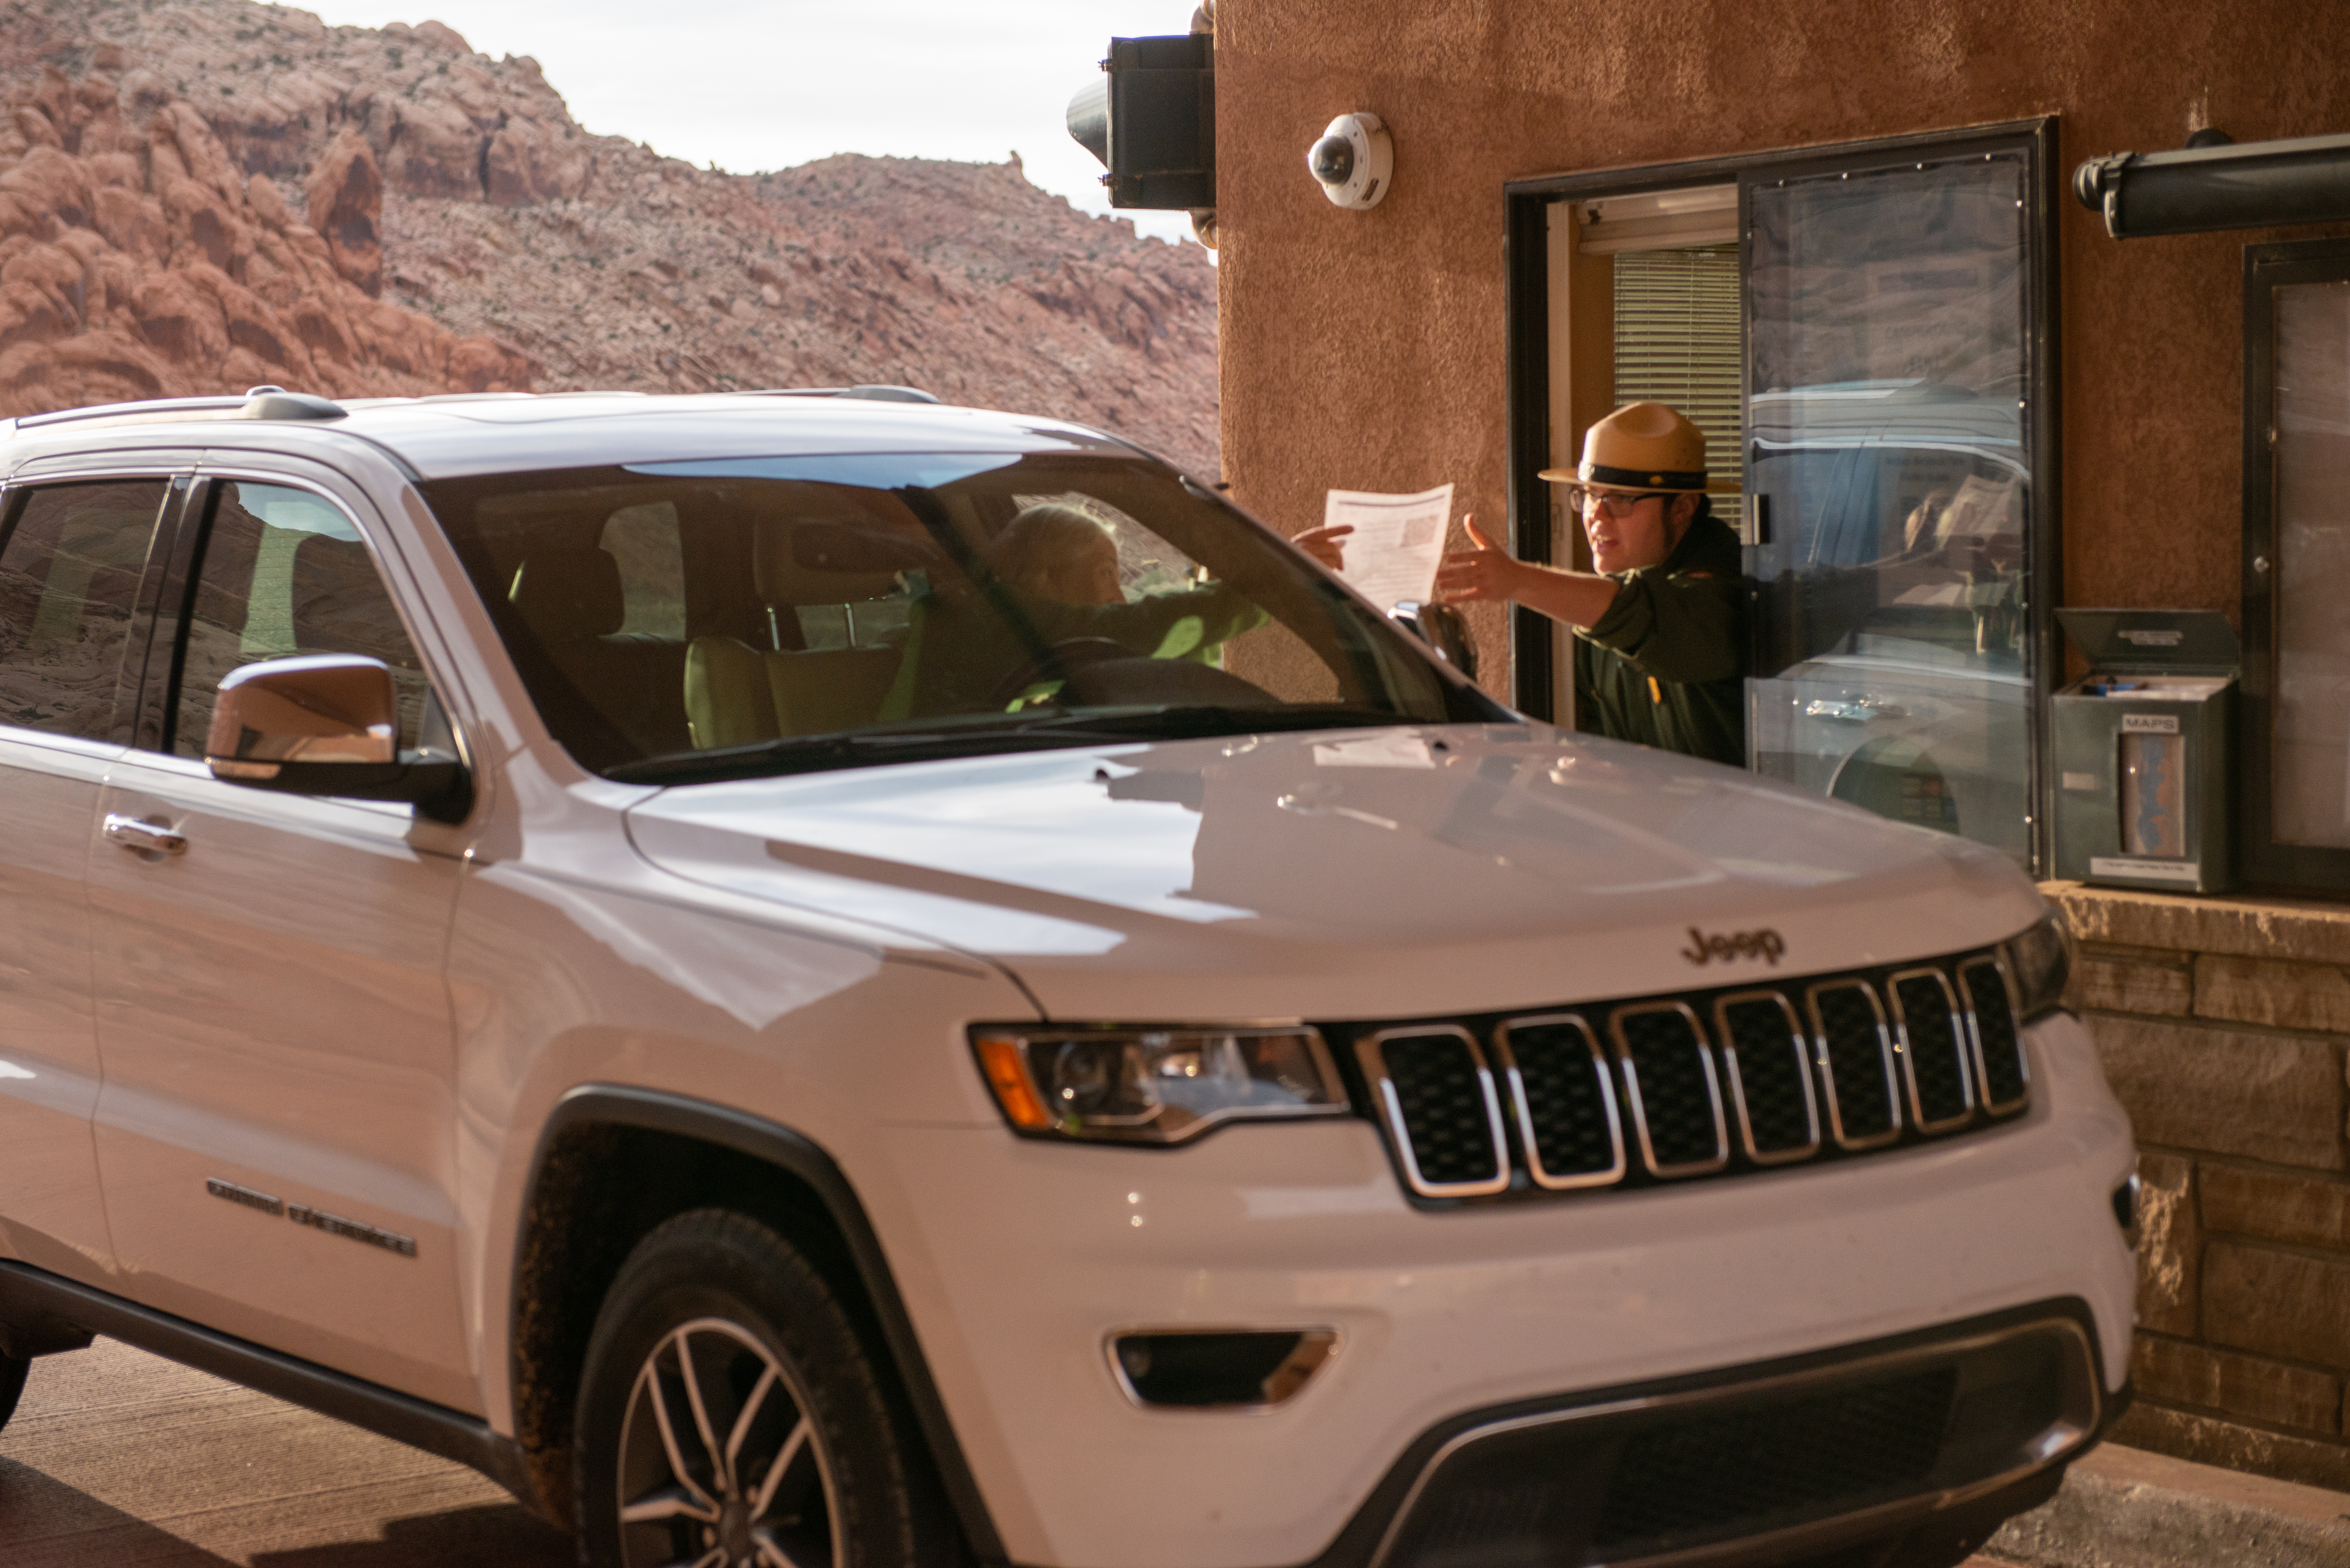 person driving white jeep hands paper to park ranger leaning out of booth window